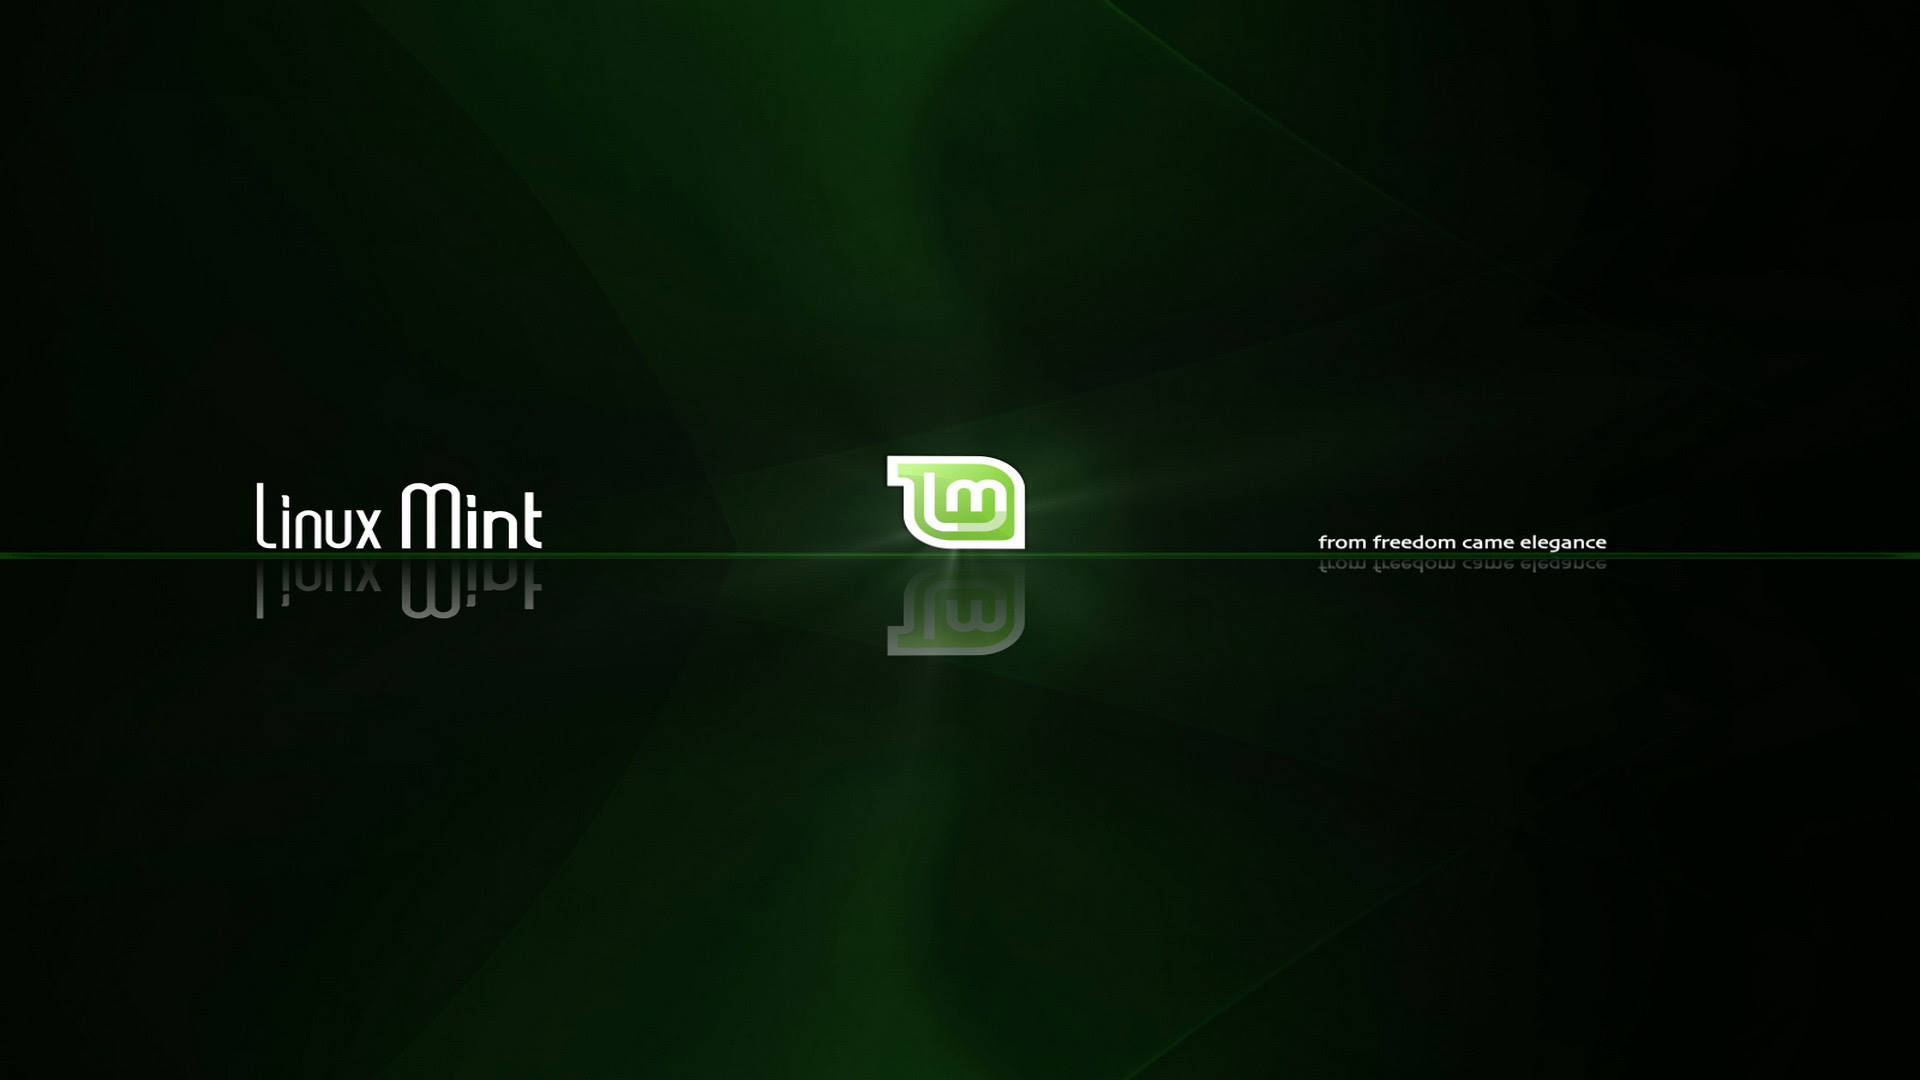 Linux Mint OS From Freedom Came Elegance Wallpaper